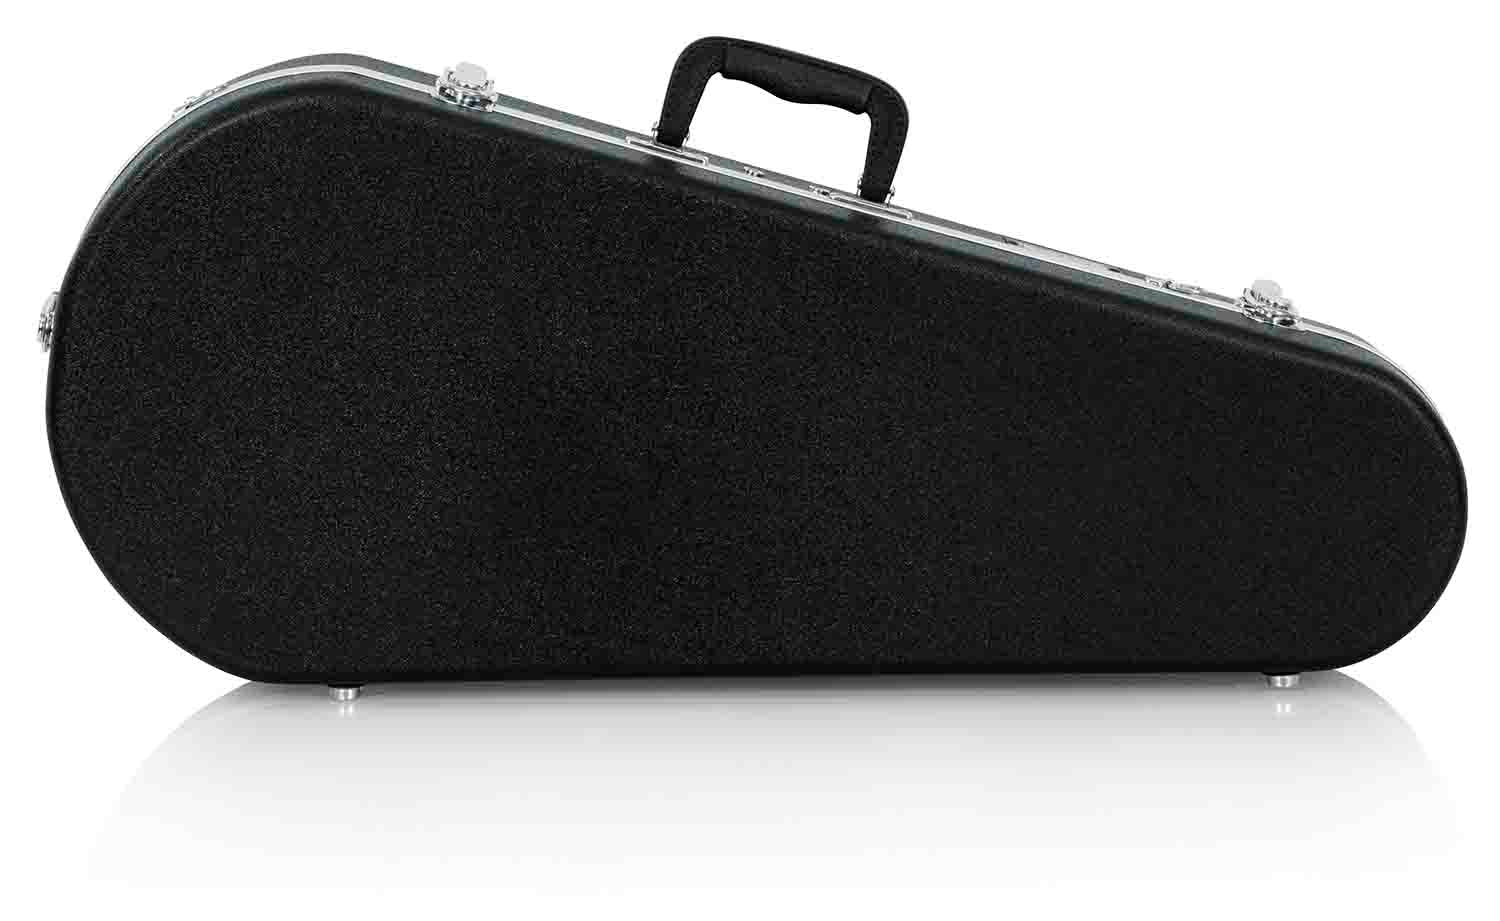 Gator Cases GC-MANDOLIN Deluxe Molded Guitar Case for Both A and F Style Mandolins Guitar - Hollywood DJ